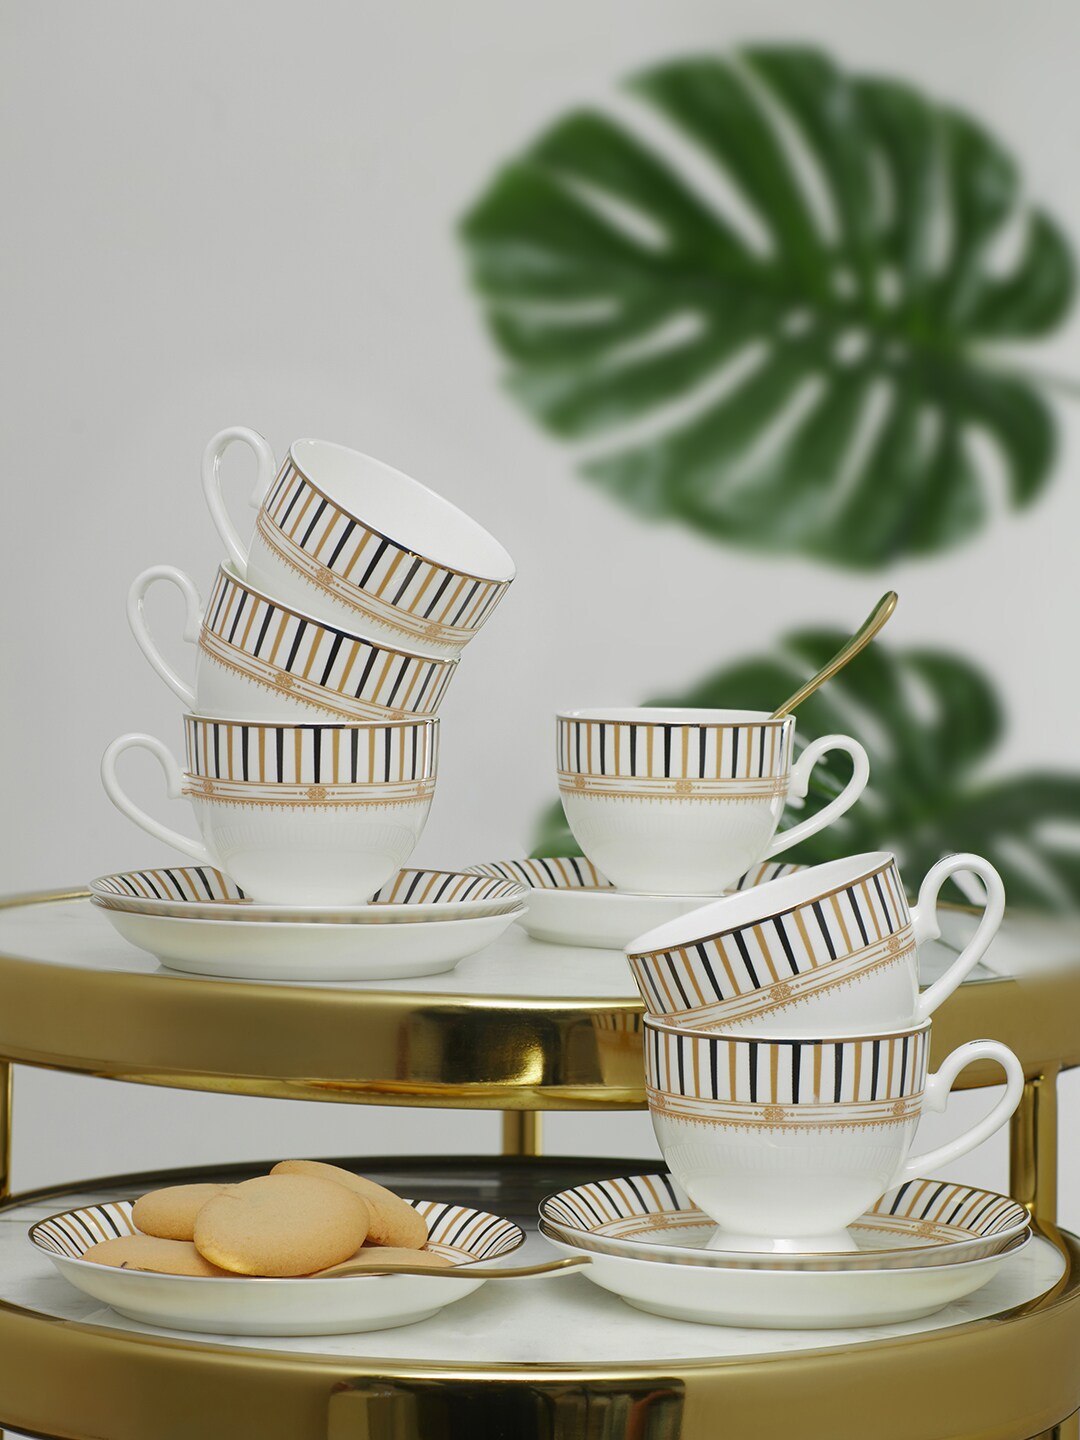 HomeTown Set of 12 White & Gold-Toned Printed Amour Bone China Cups and Saucers Price in India